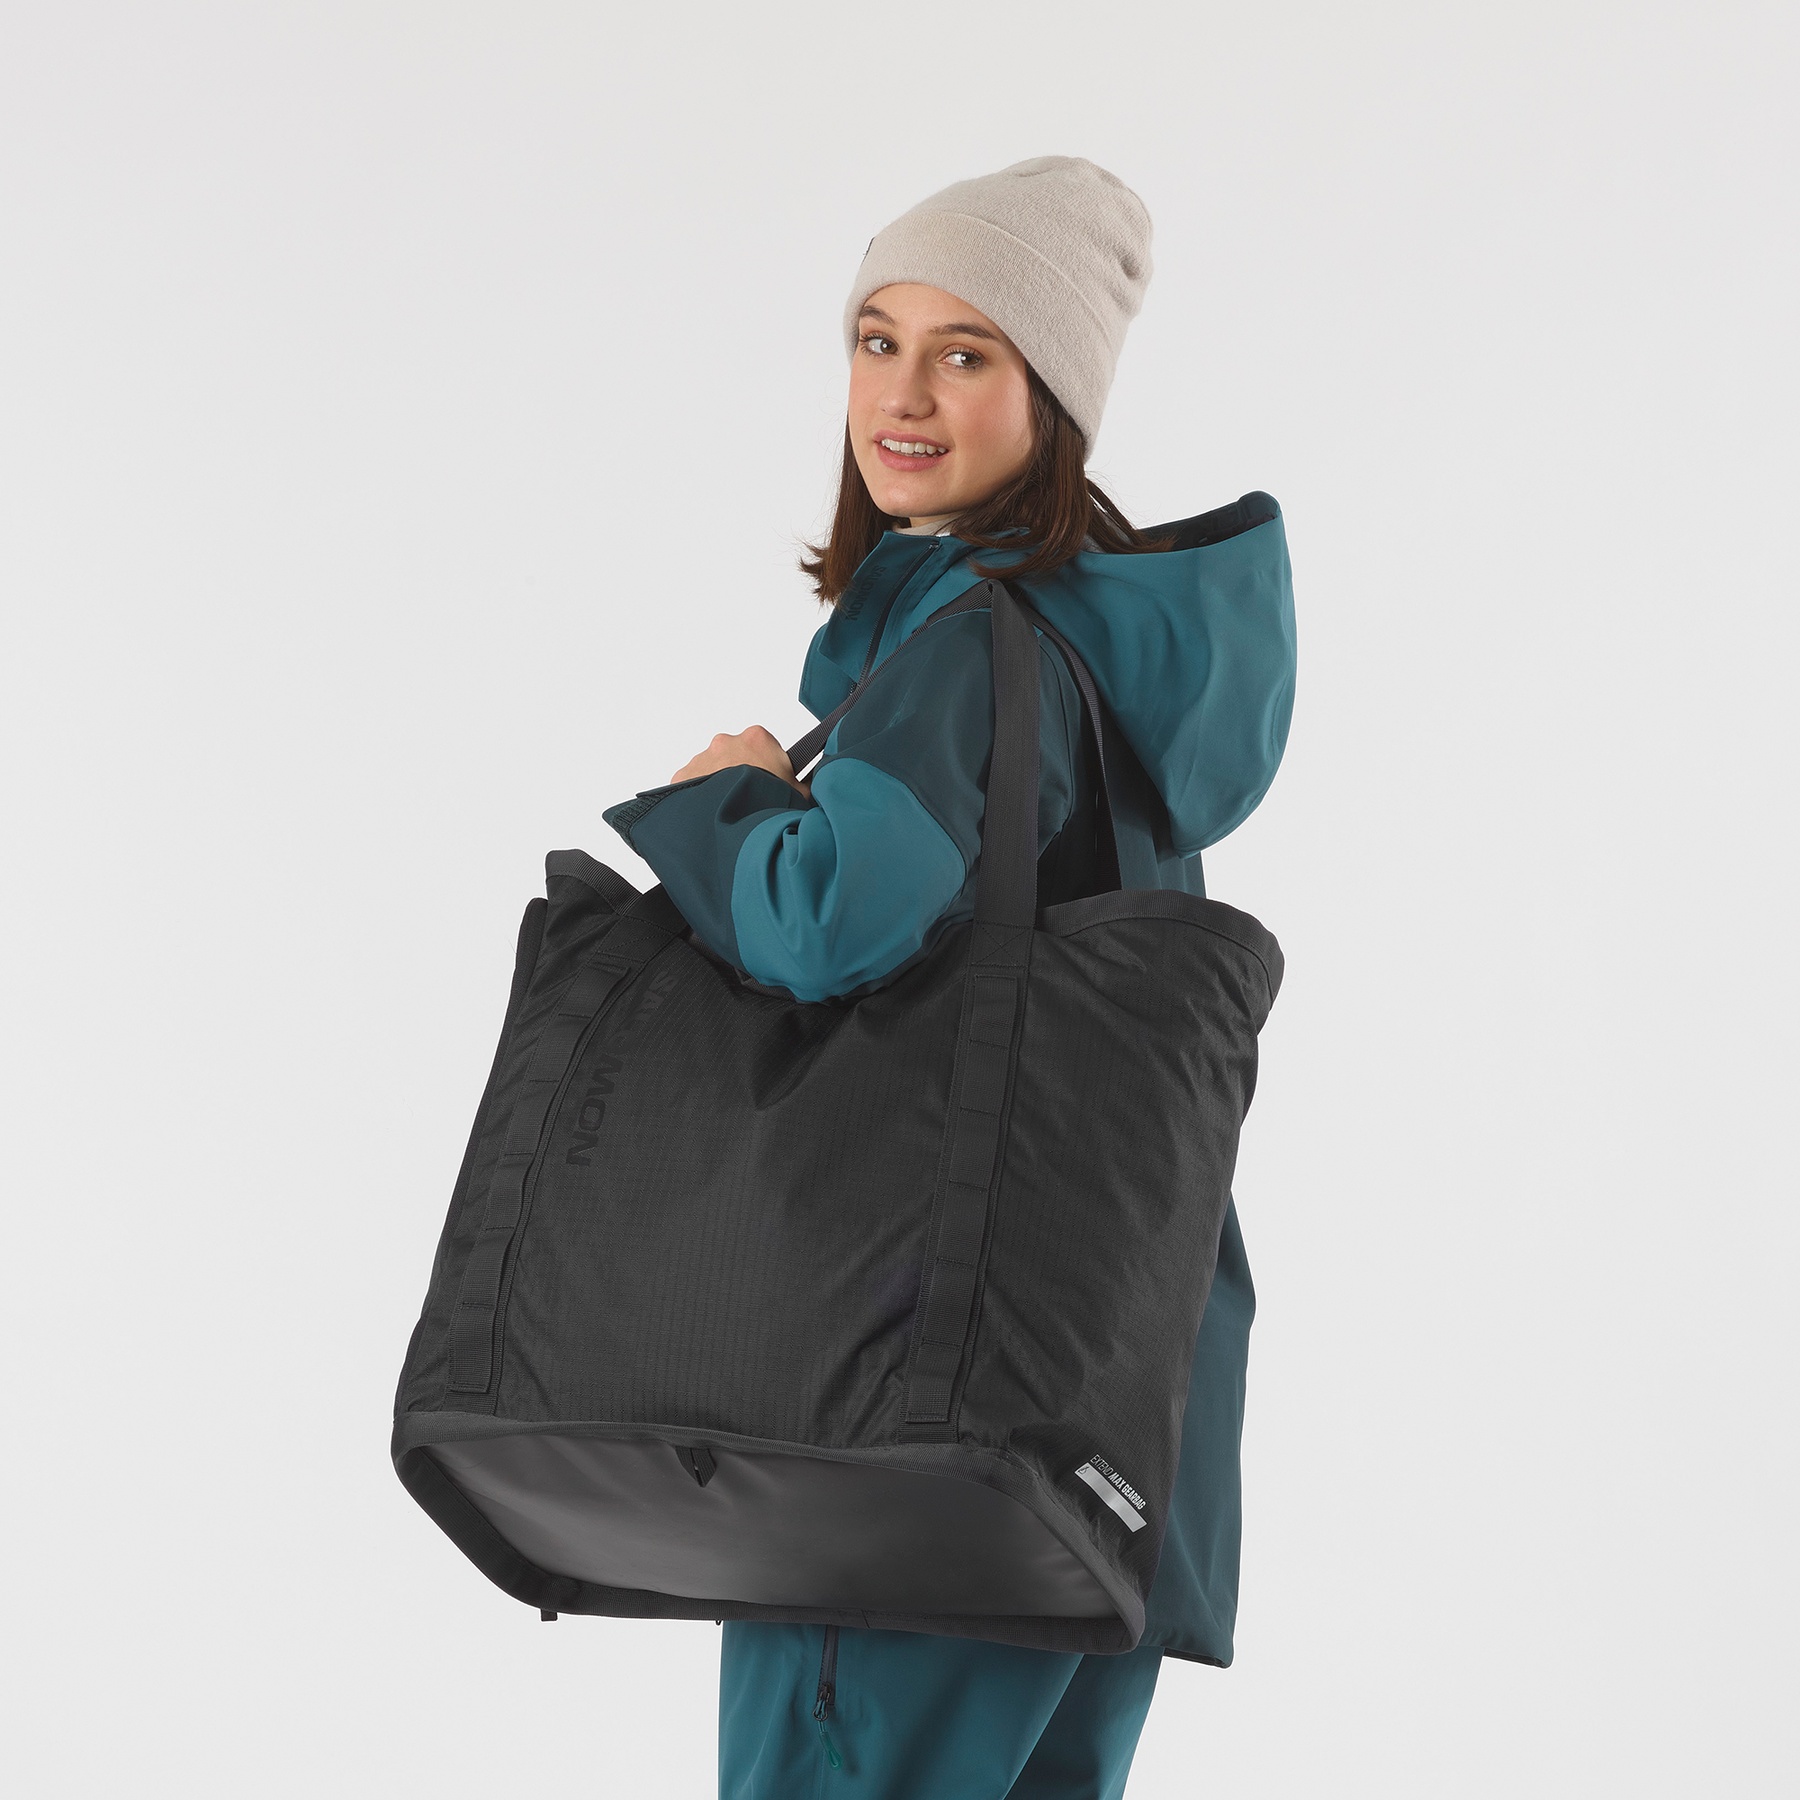 EXTEND MAX GEARBAG - 4